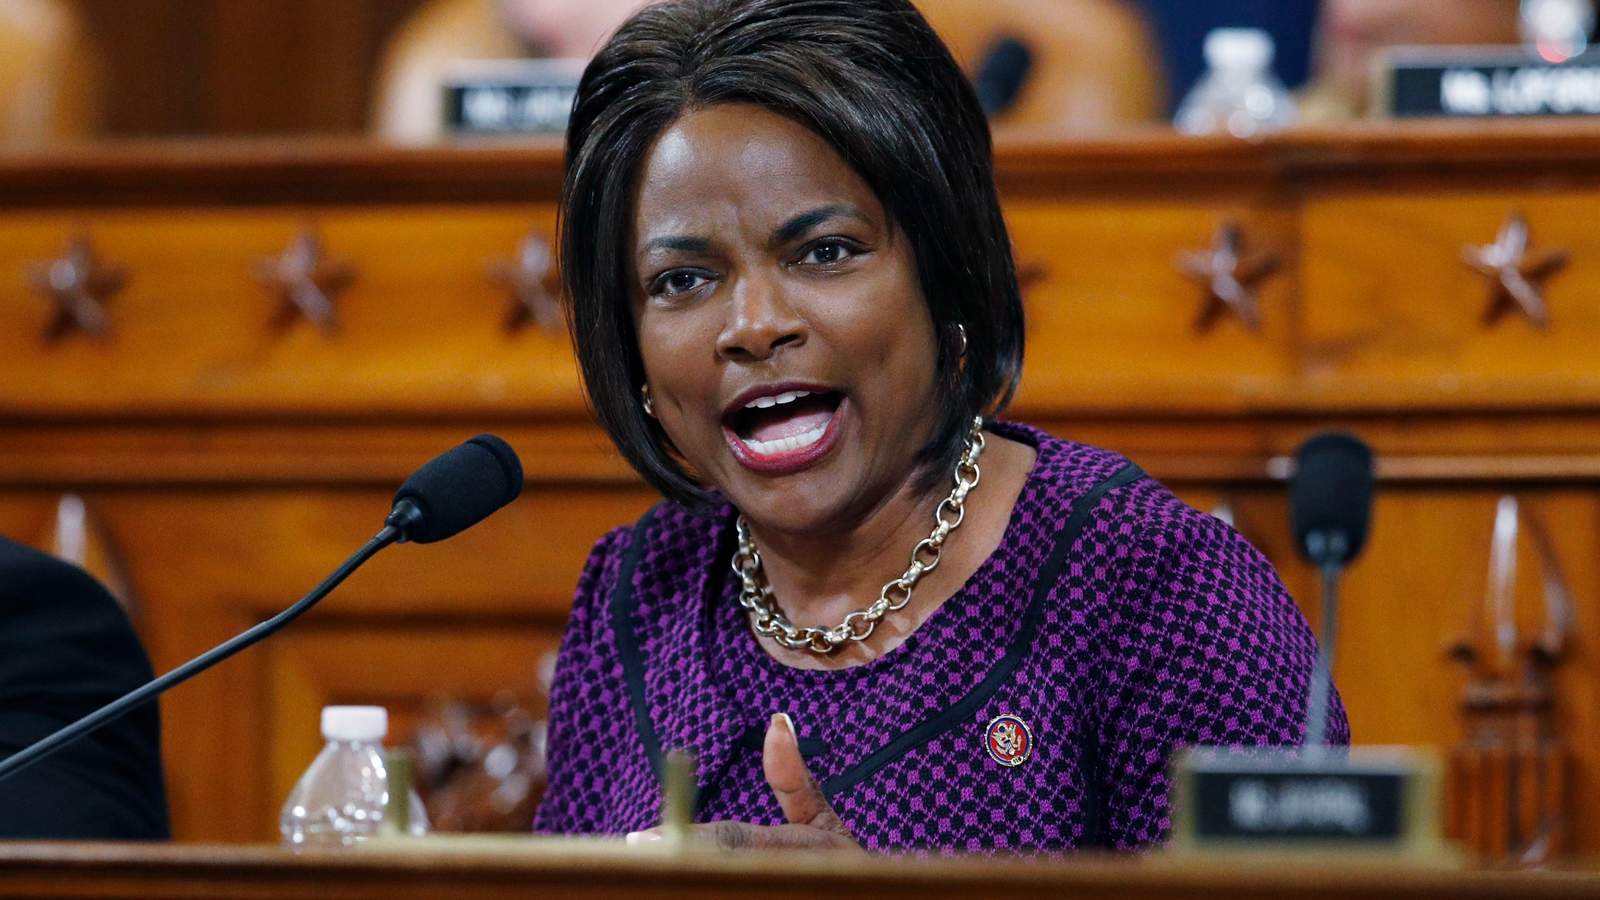 Val Demings open to running for office outside of US House